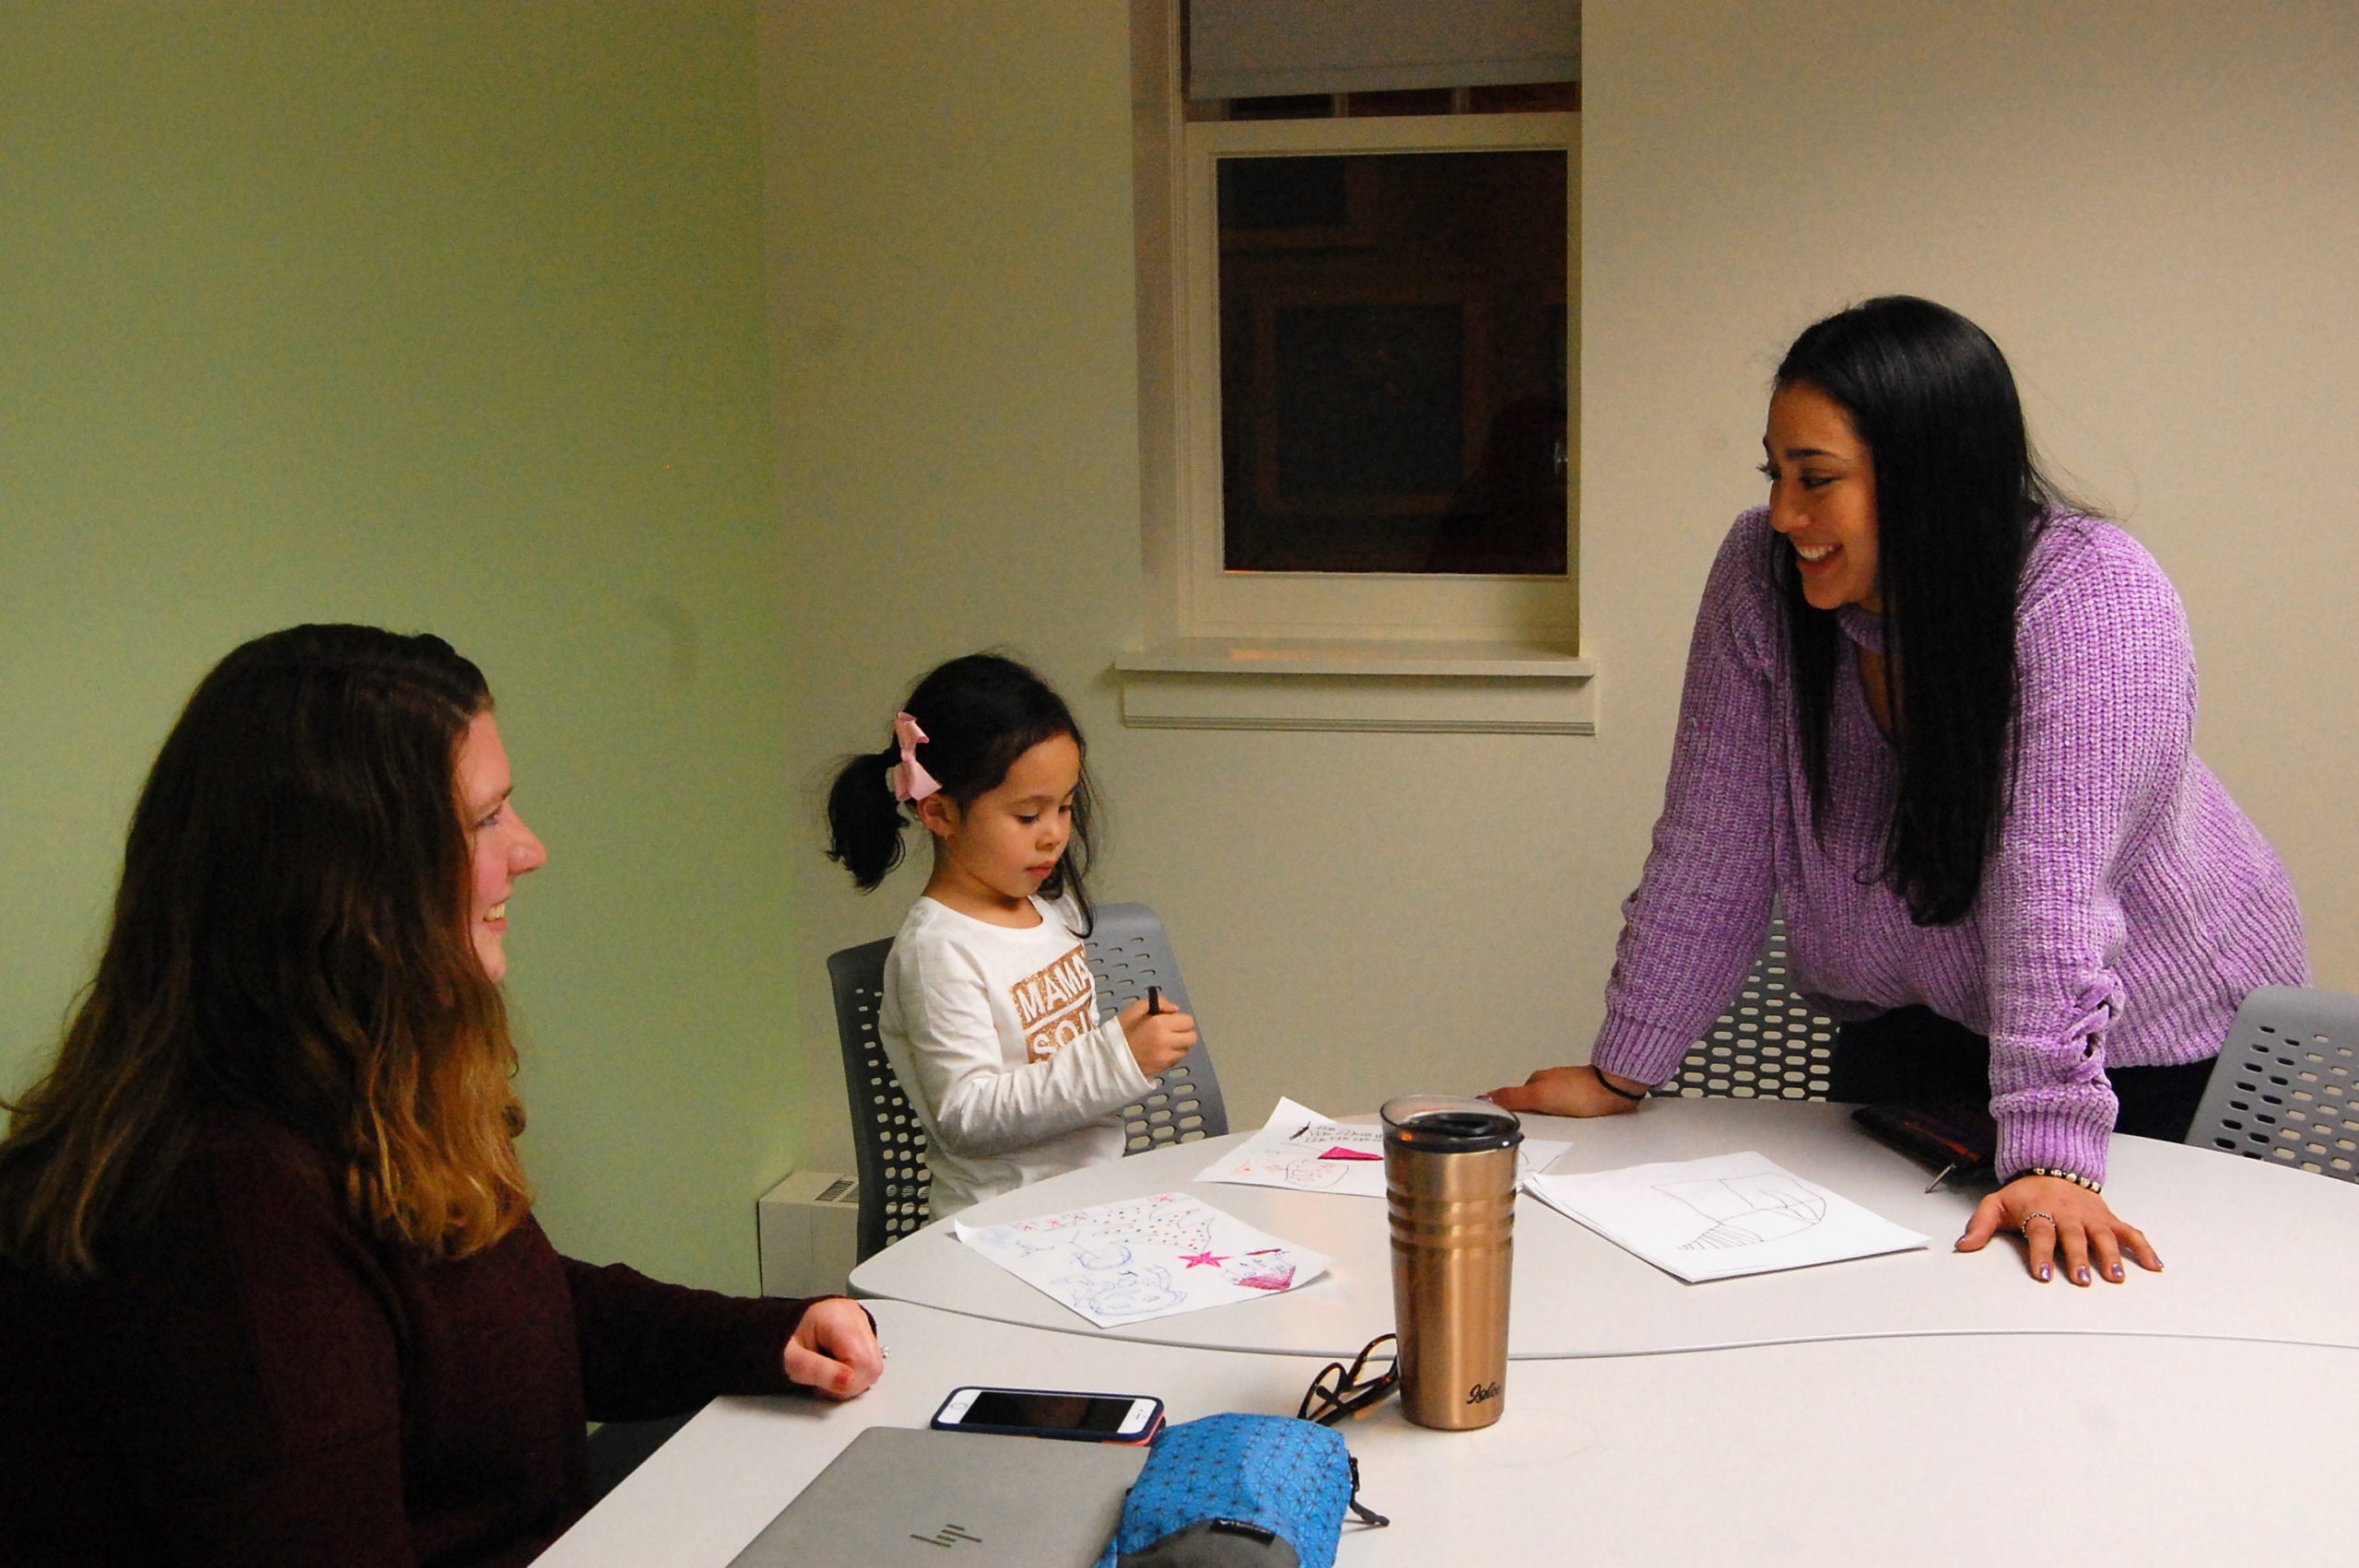 In December, Afrodita Salgado (right) brought her 5-year-old daughter, Amelia, to meet with her coach, Angela Crawford Neven, in a Chicago public library as part of a new online college program.